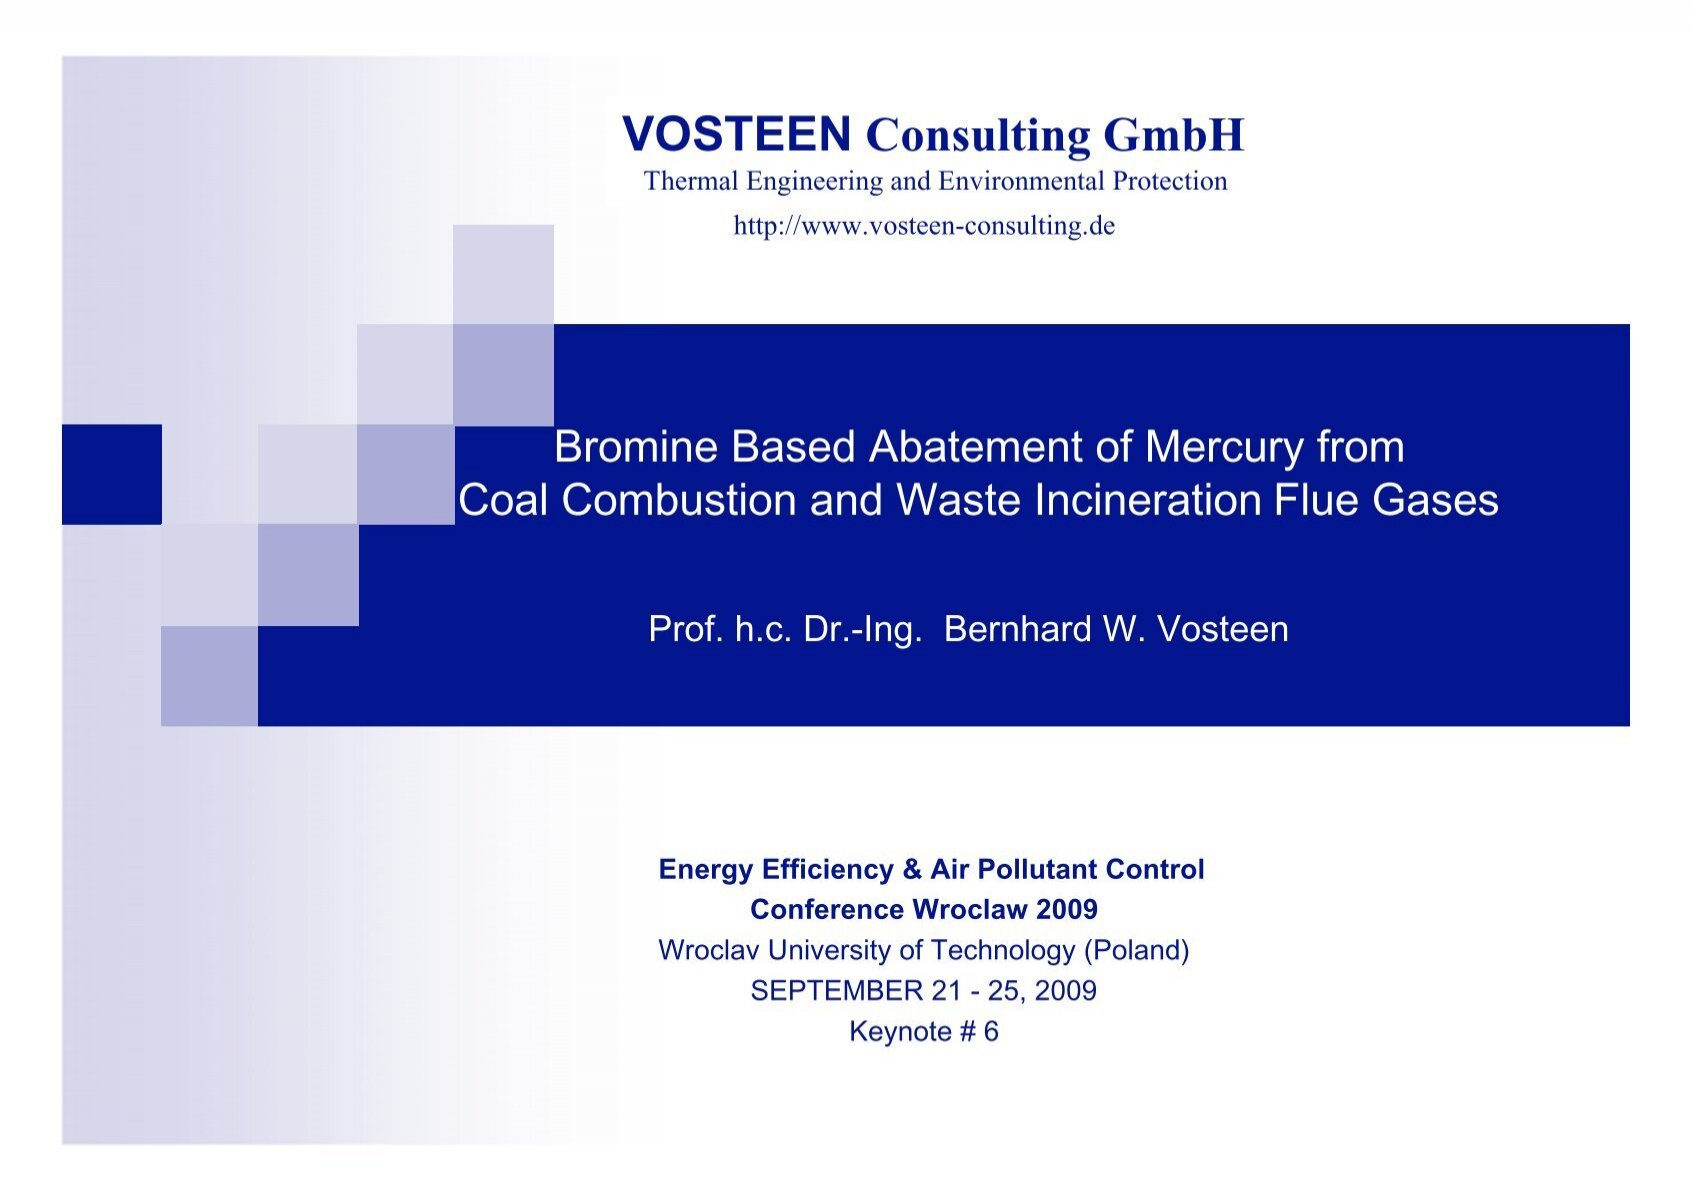 Hg Vosteen Consulting Gmbh